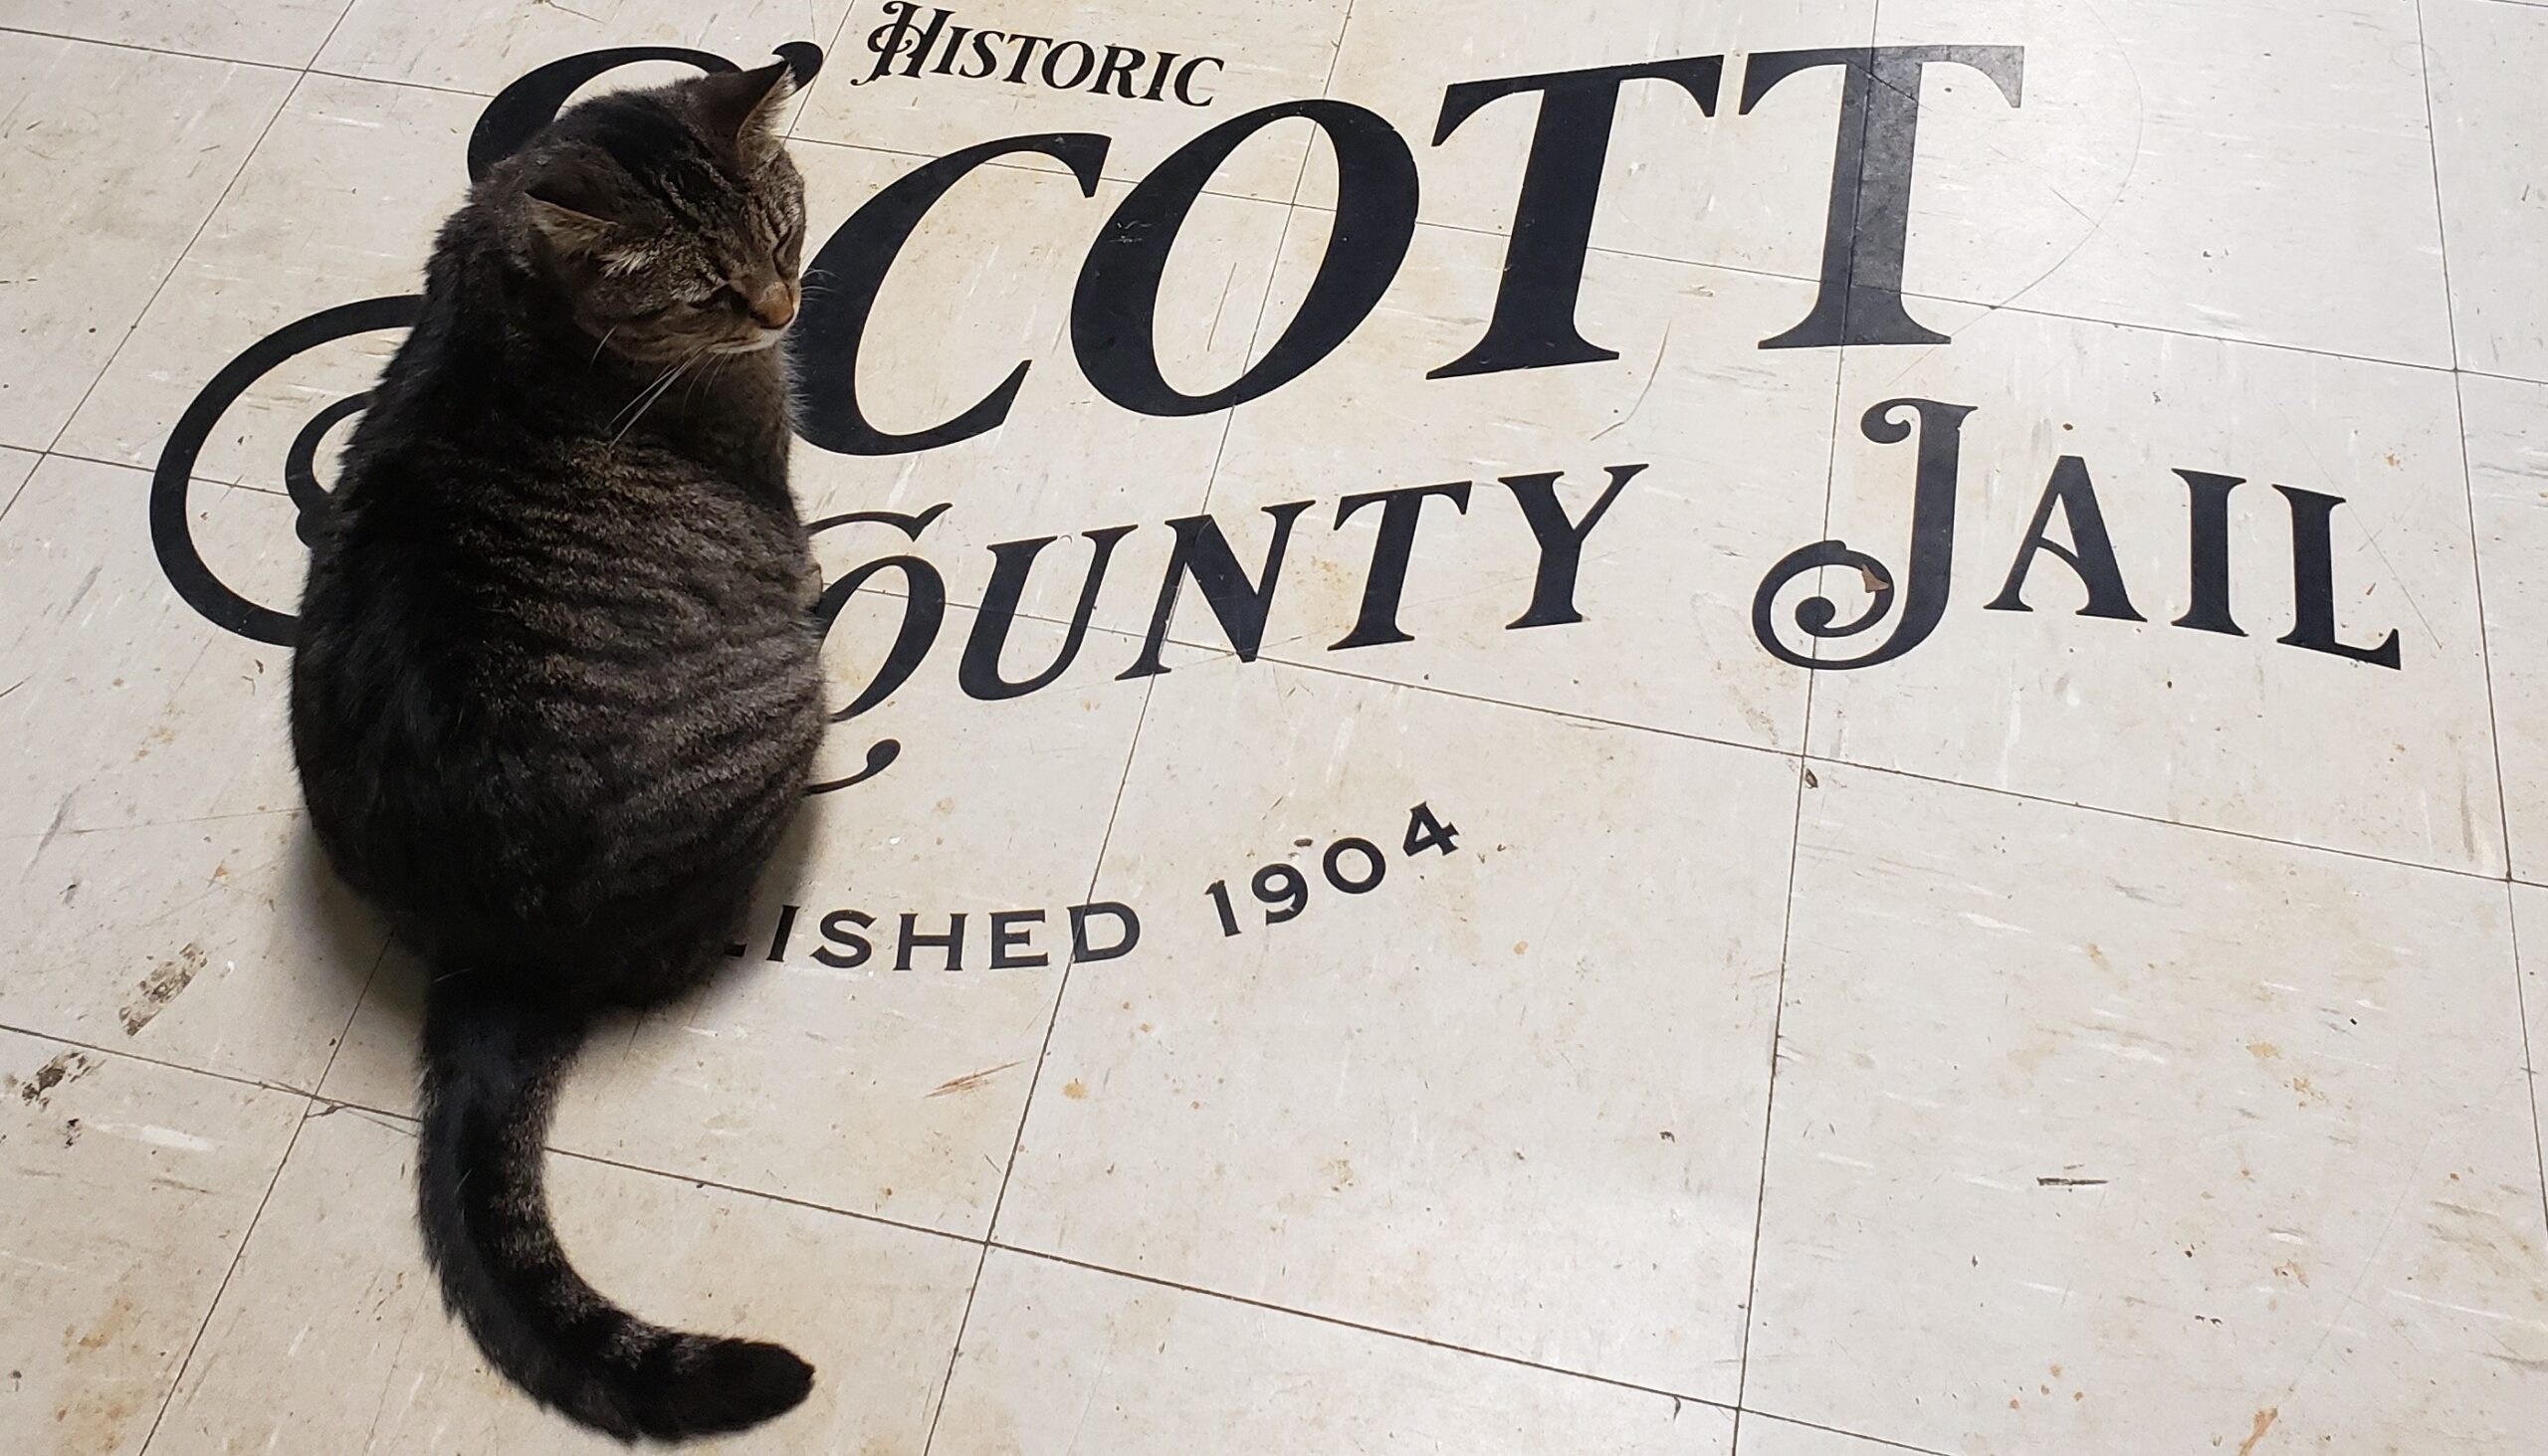 Celly, the adorable chonky tabby cat mascot of the Historic Scott County Jail poses coyly in front of the stylized logo emblazoned on the jail's linoleum foyer floor.